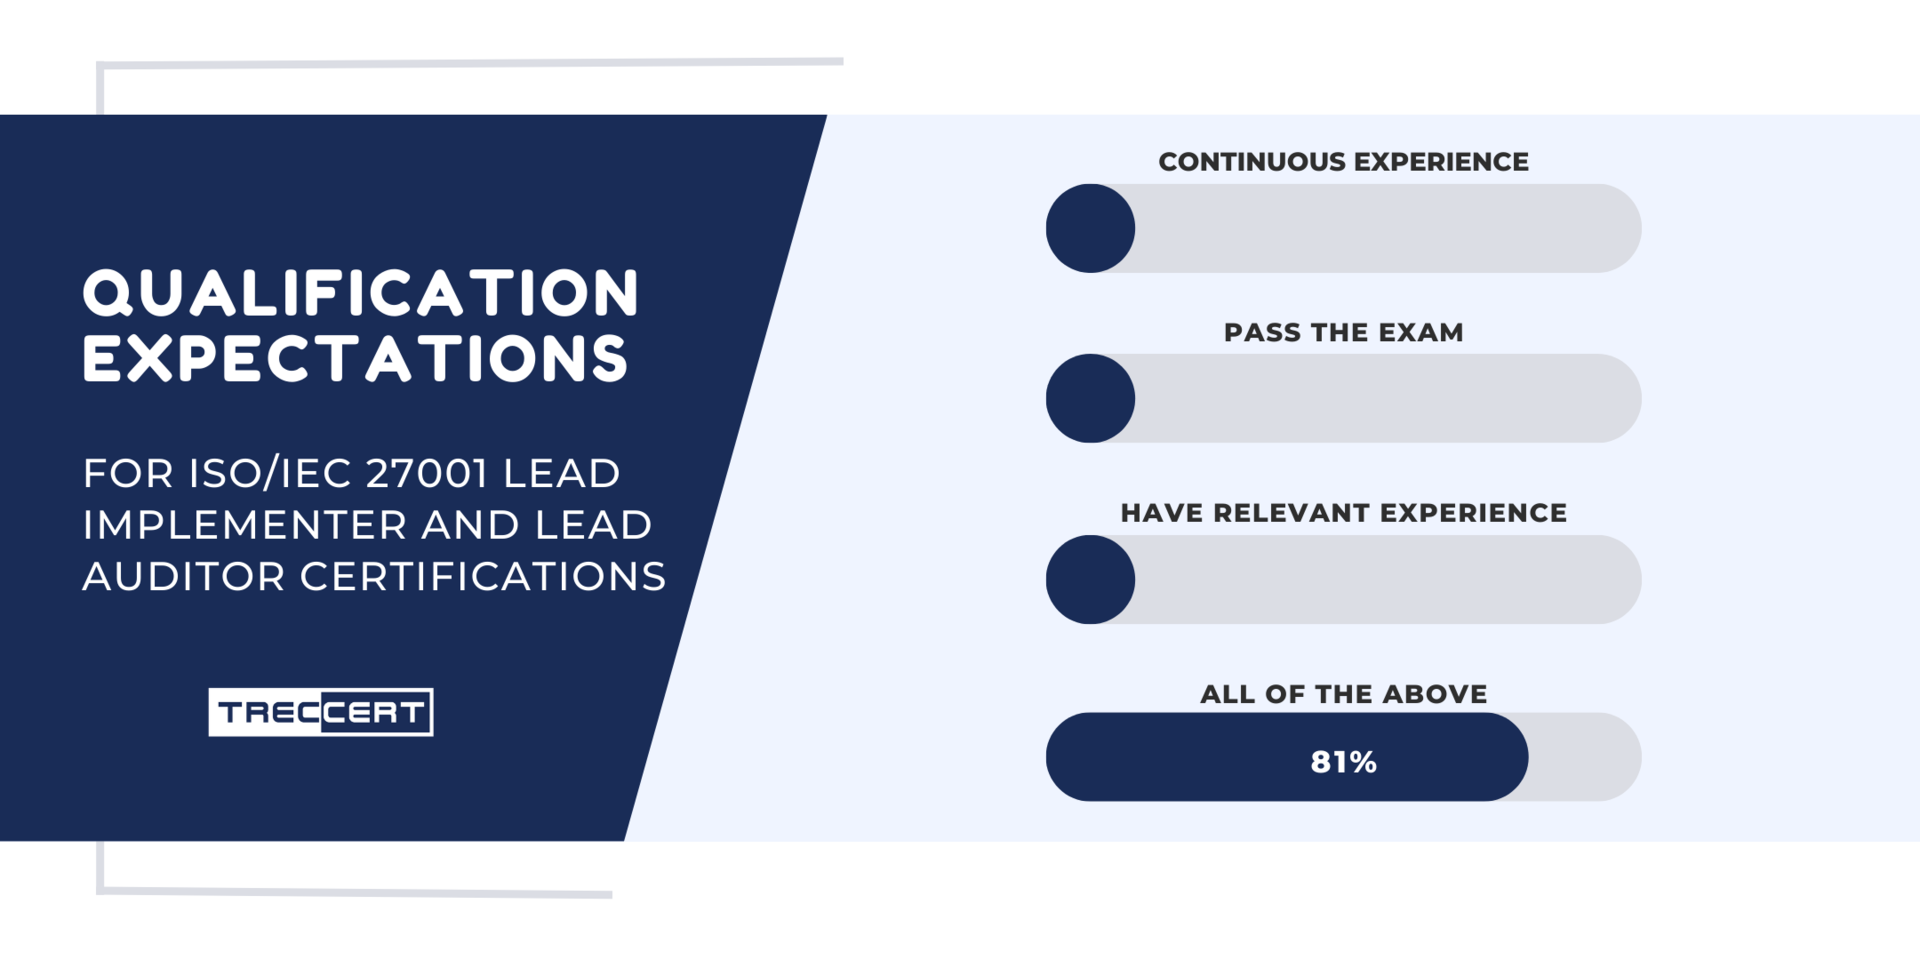 Survey Results for ISO/IEC 27001 Certification Requirements Expectations